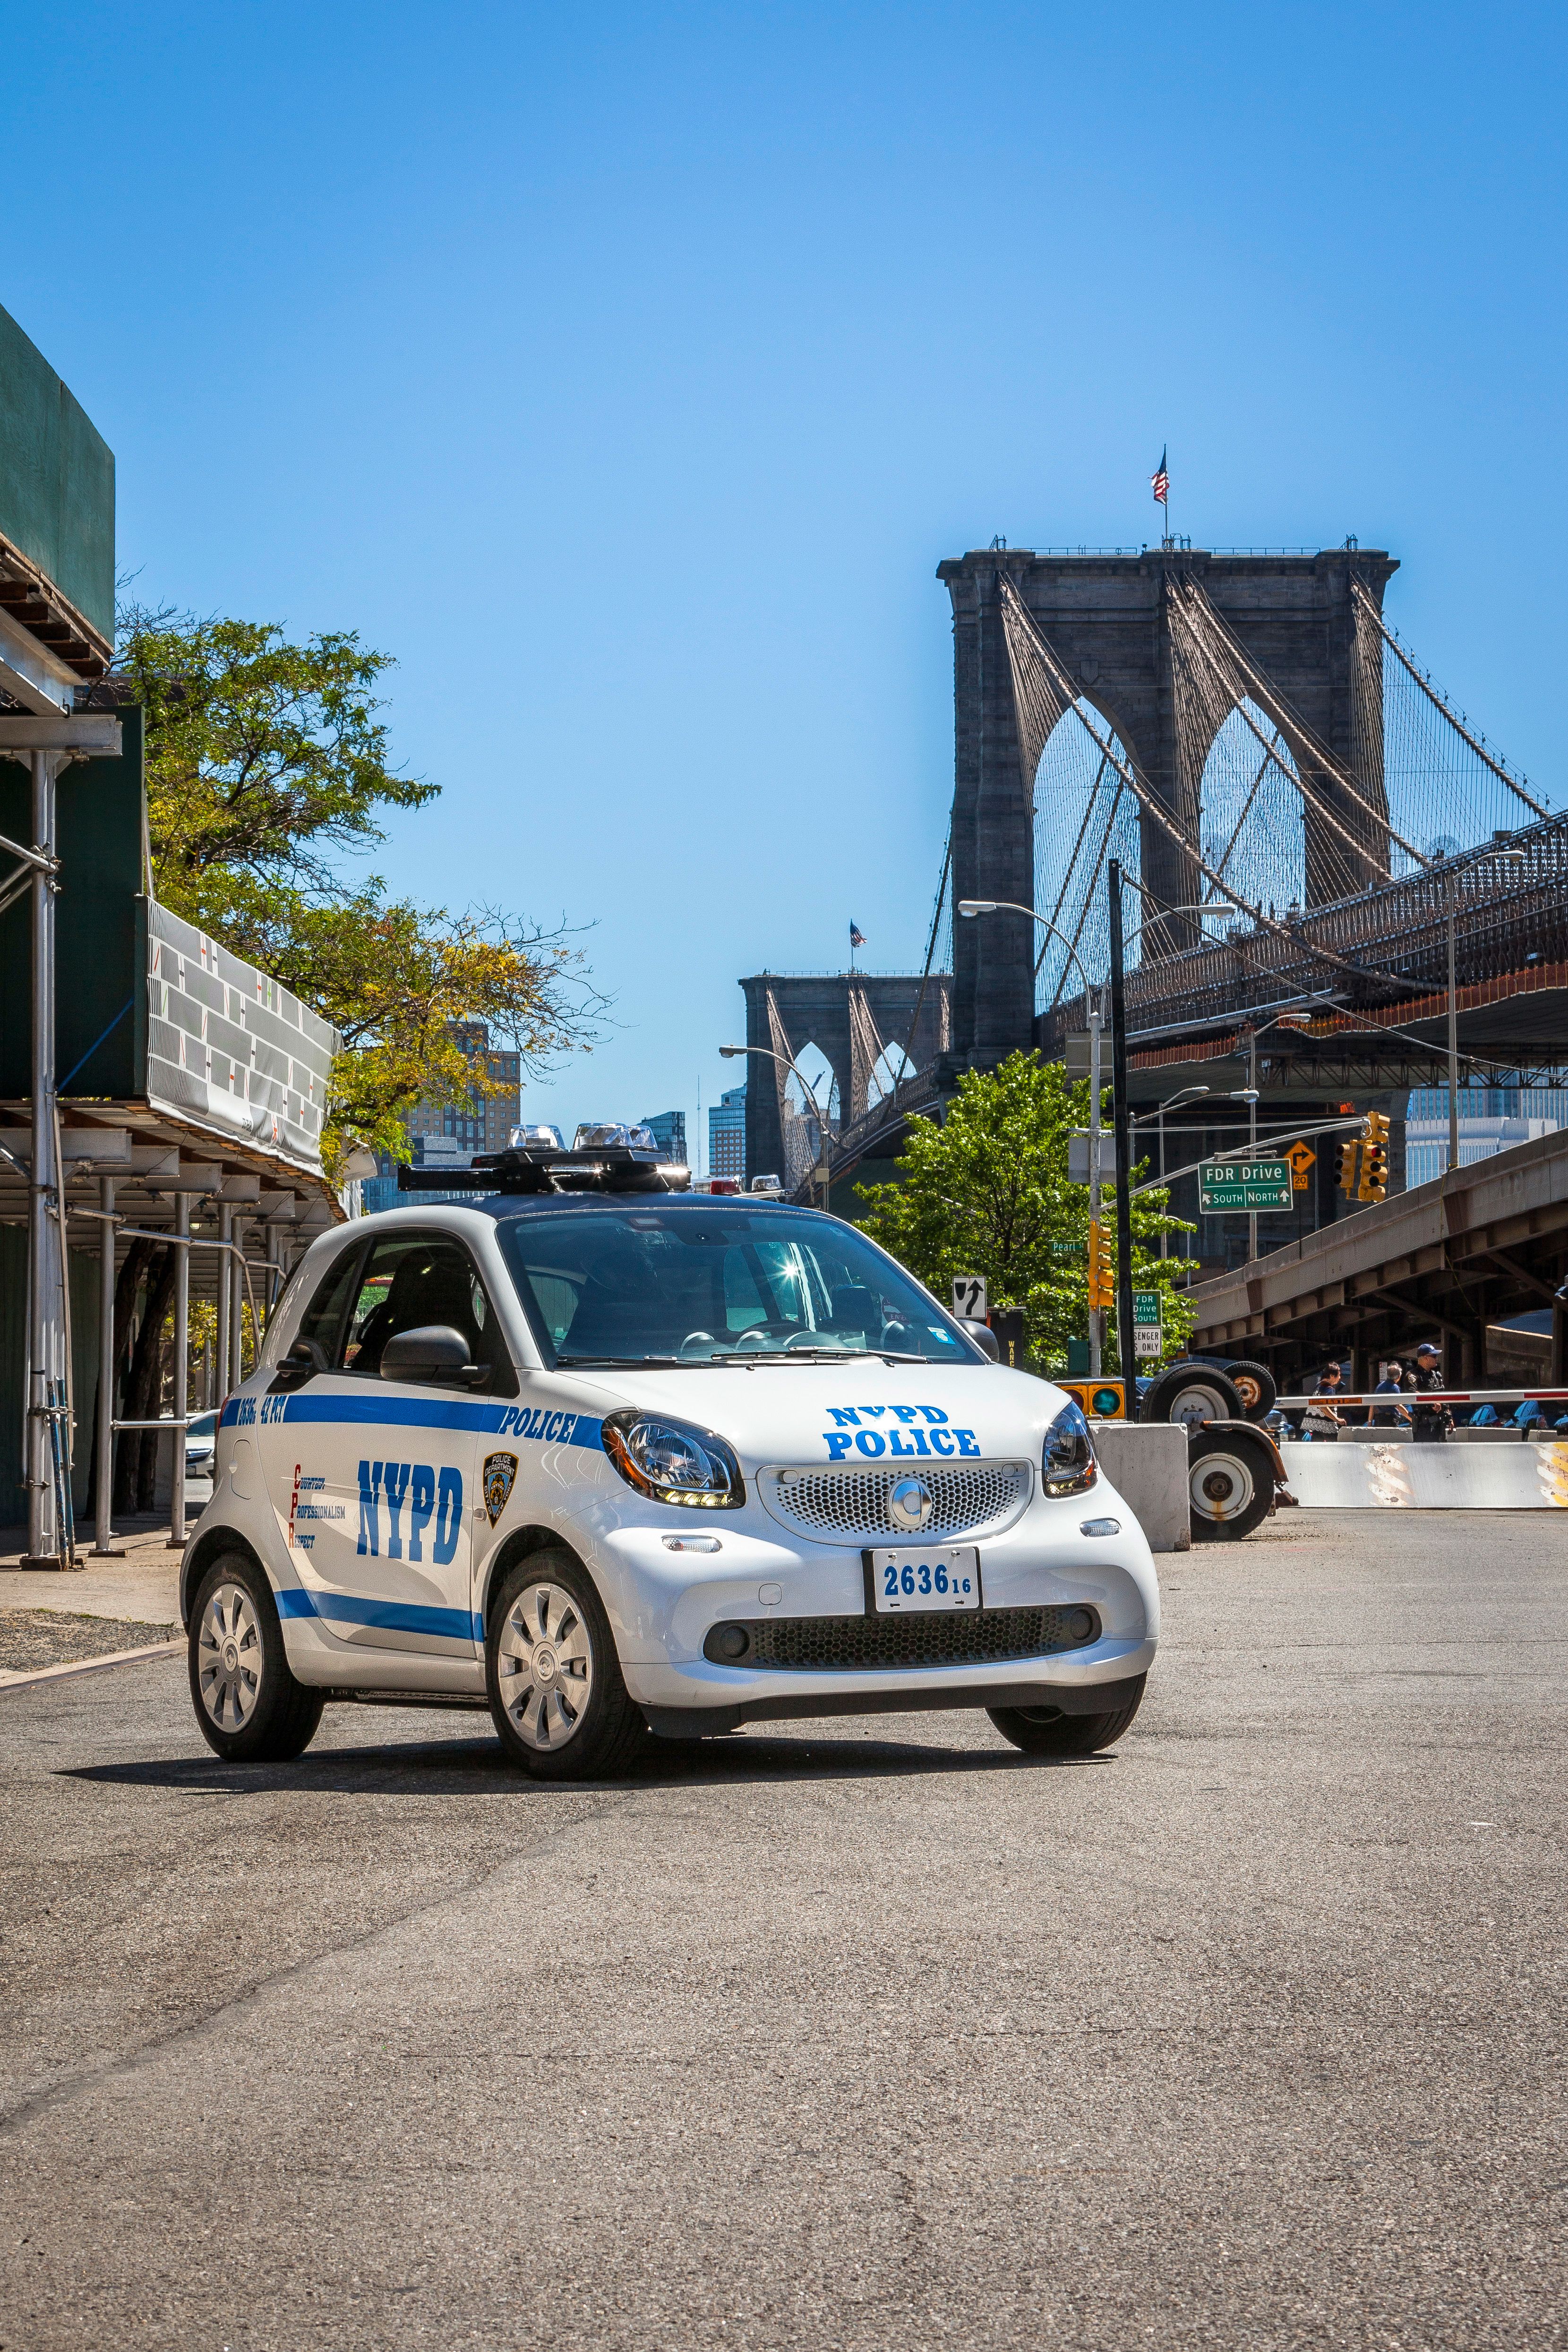 2016 Smart ForTwo NYPD Edition